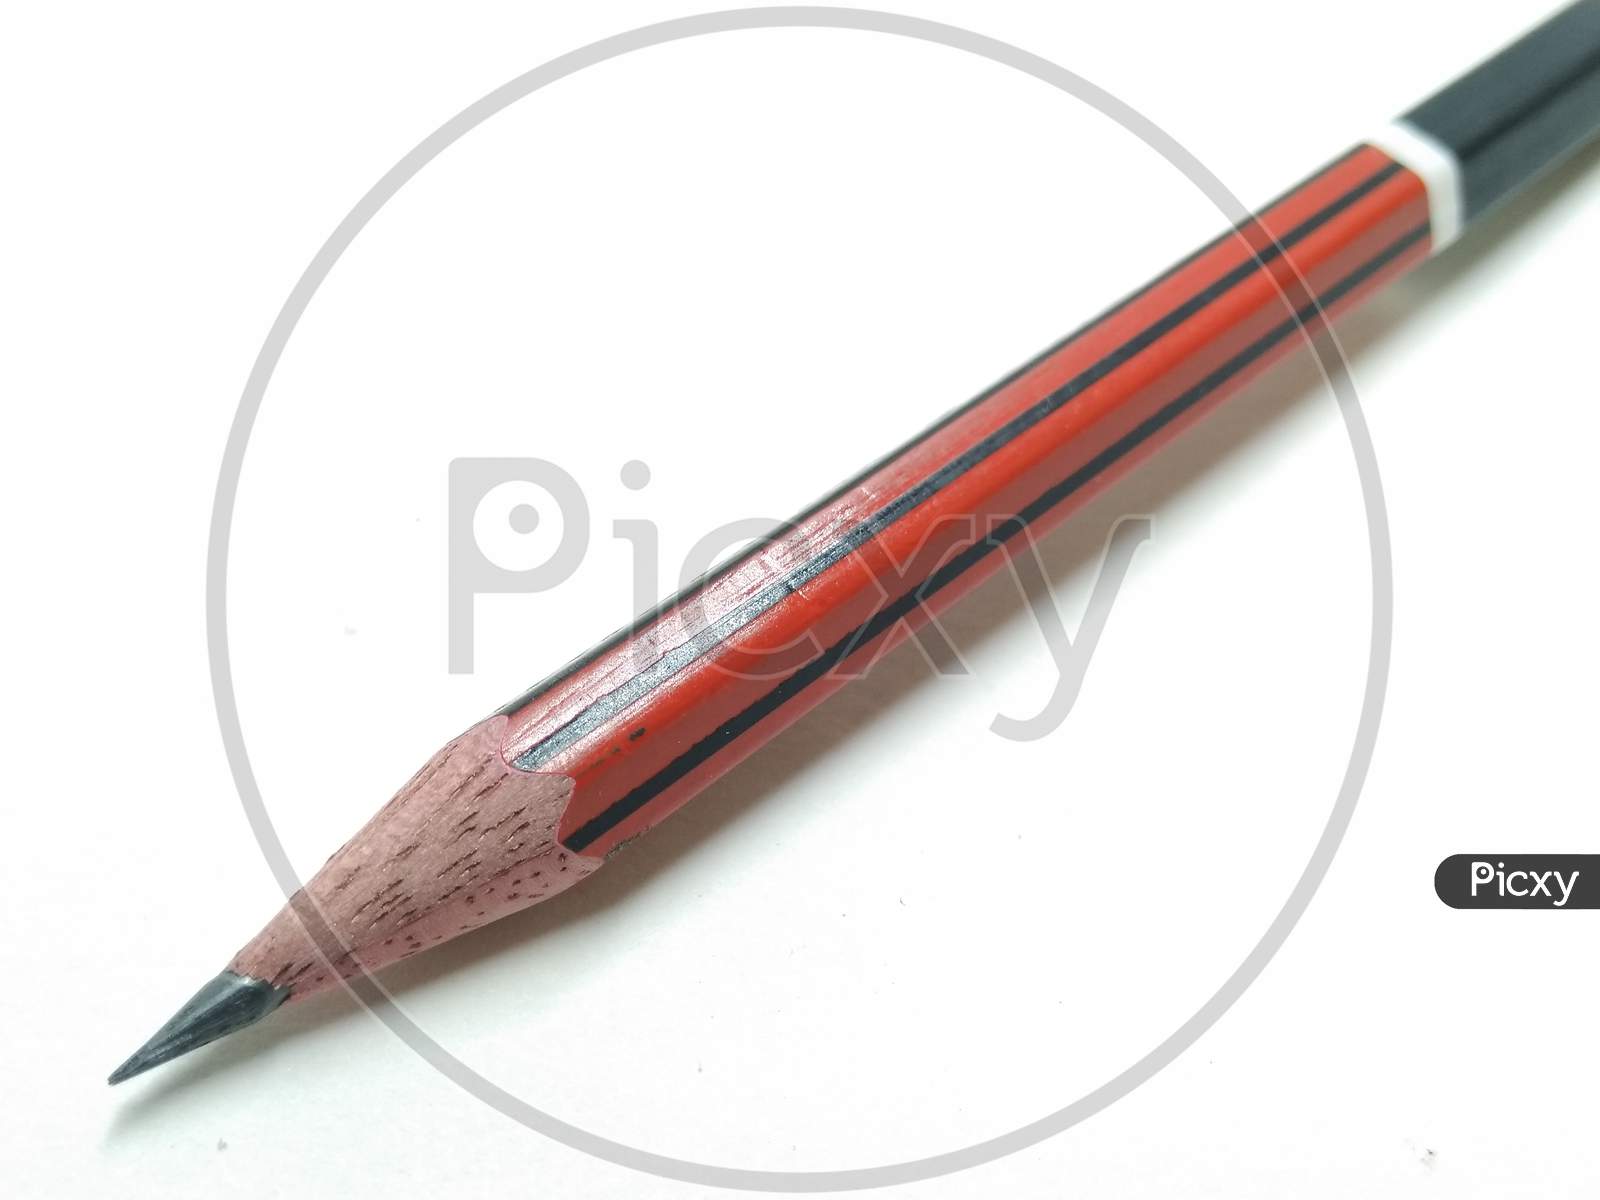 Pencil Over an isolated White Background